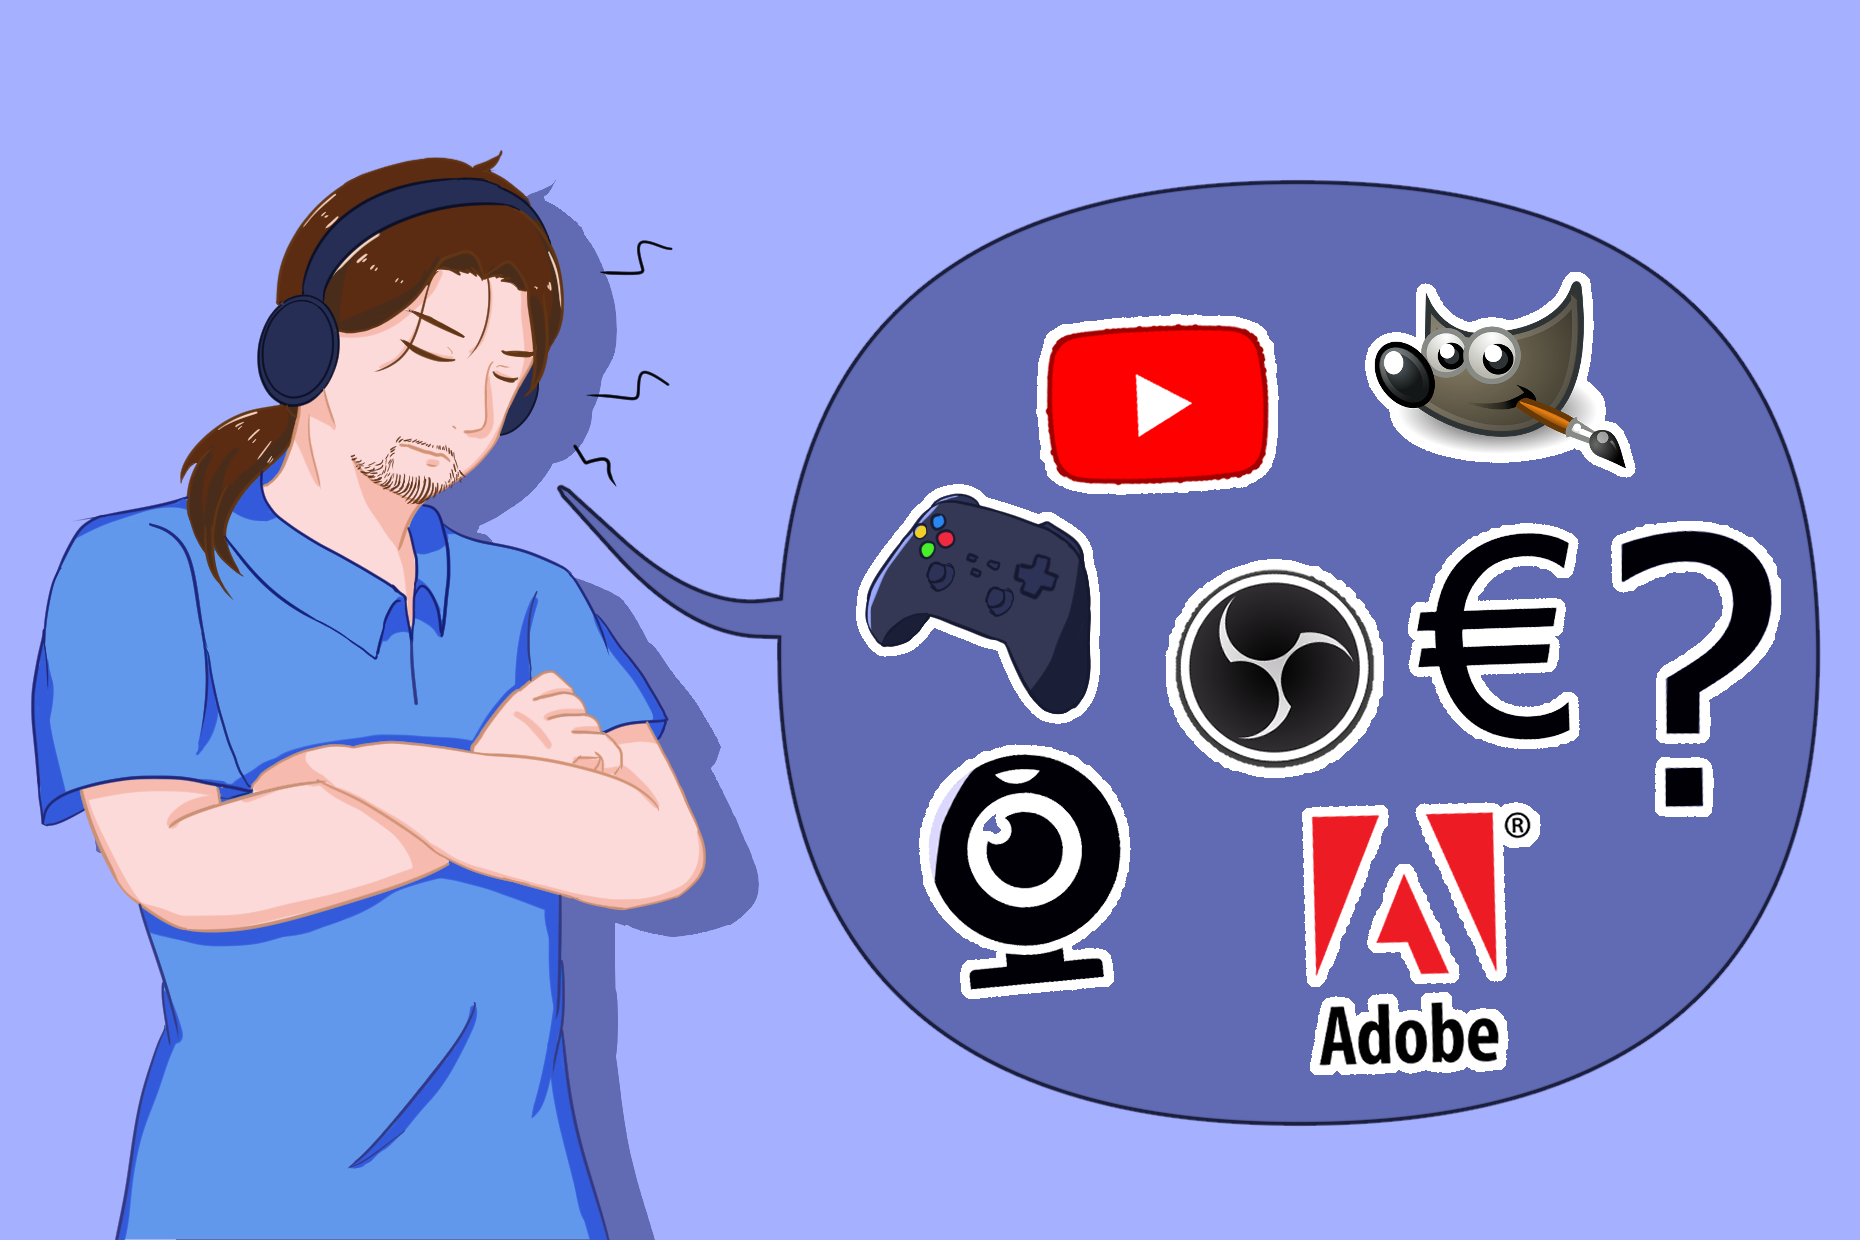 How to Start a  Gaming Channel in 2021 